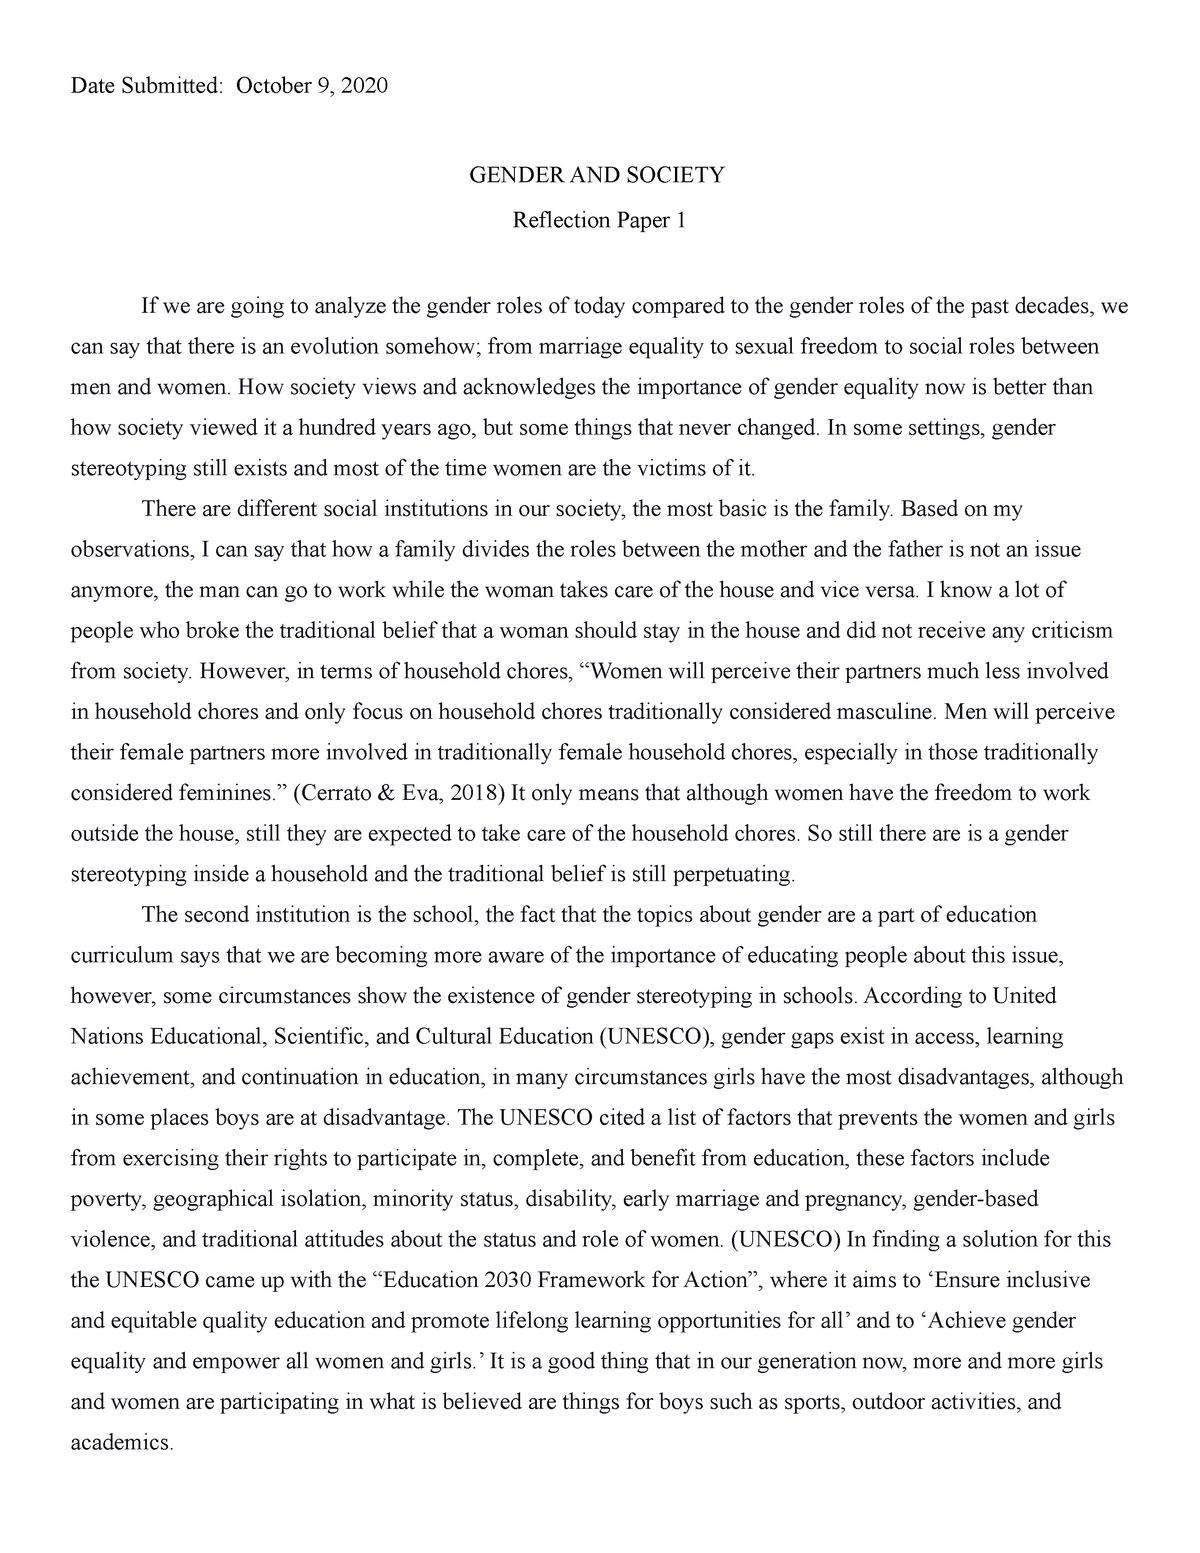 essay about modern society